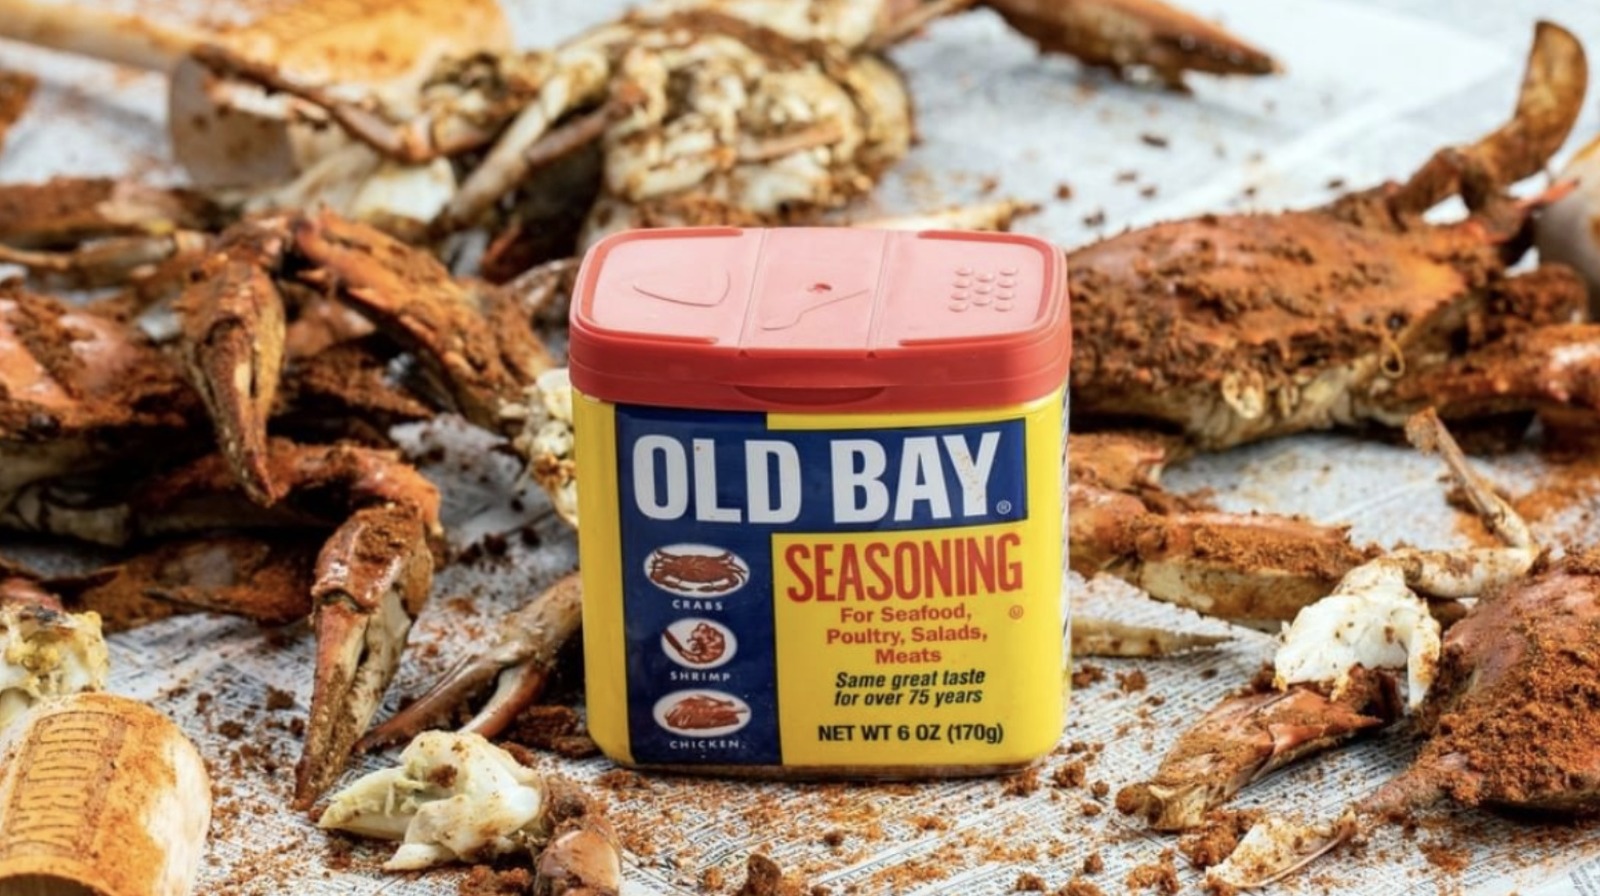 https://www.mashed.com/img/gallery/heres-what-you-can-use-old-bay-seasoning-for-aside-from-seafood/l-intro-1607108611.jpg